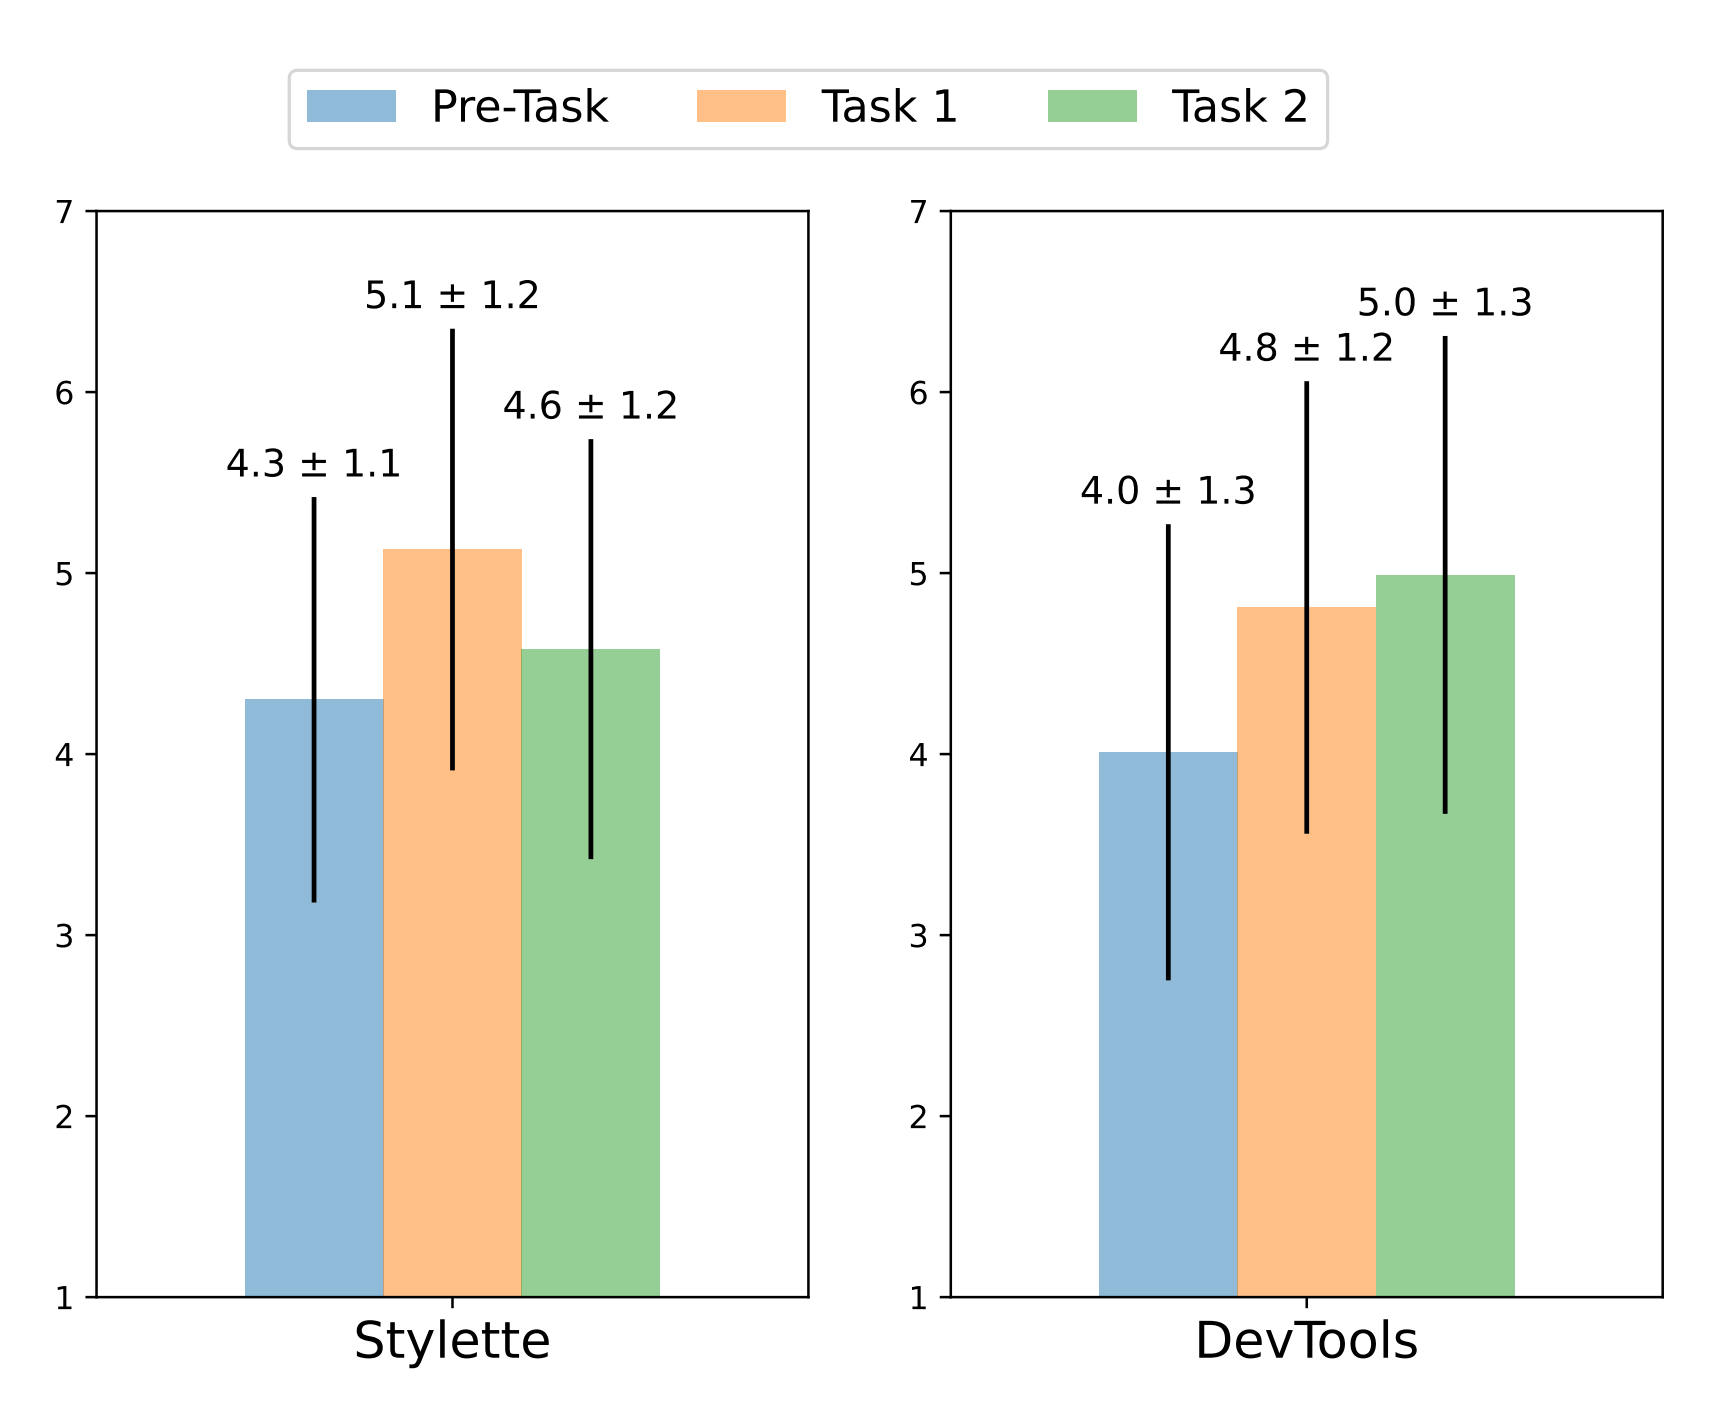 Bar chart on the left shows that the self-confidence of Stylette participants initially increased, but decreased later during the study. Bar chart on the right shows that self-confidence of DevTools participants increased initially and also slightly increased later in the study. Specific self-confidence ratings are included in the text.